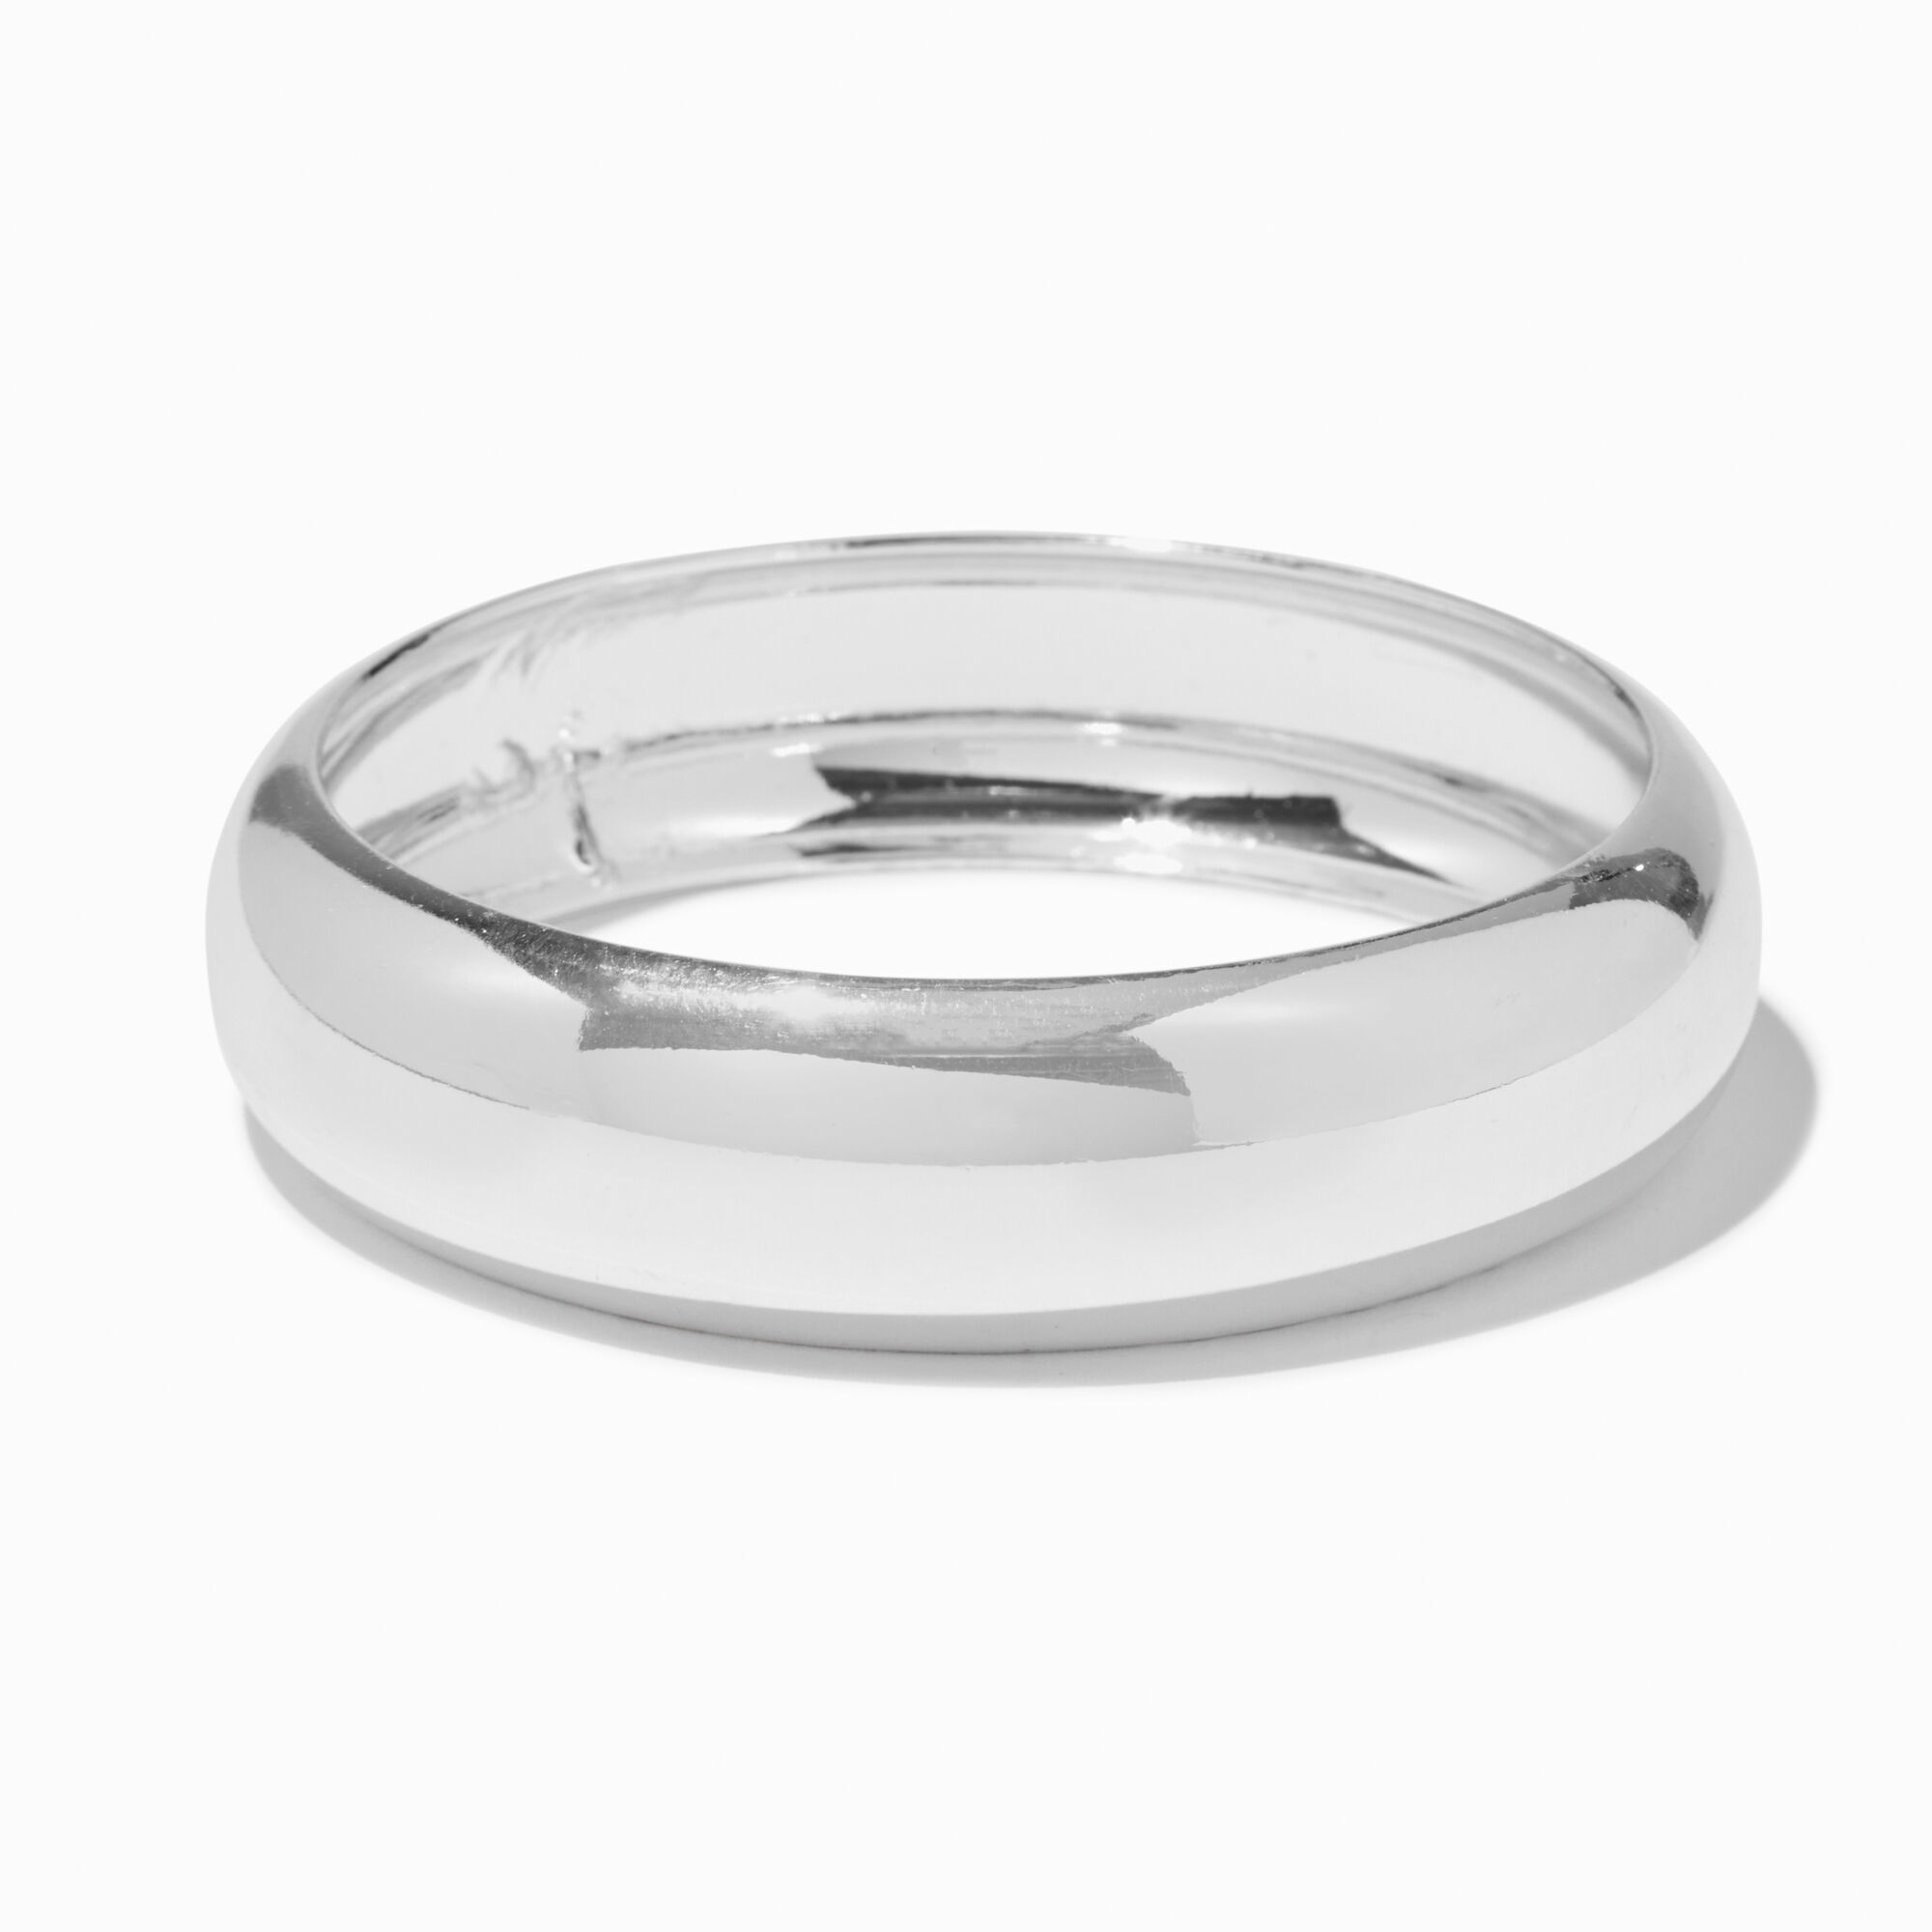 View Claires Tone Chunky Bangle Bracelet Silver information